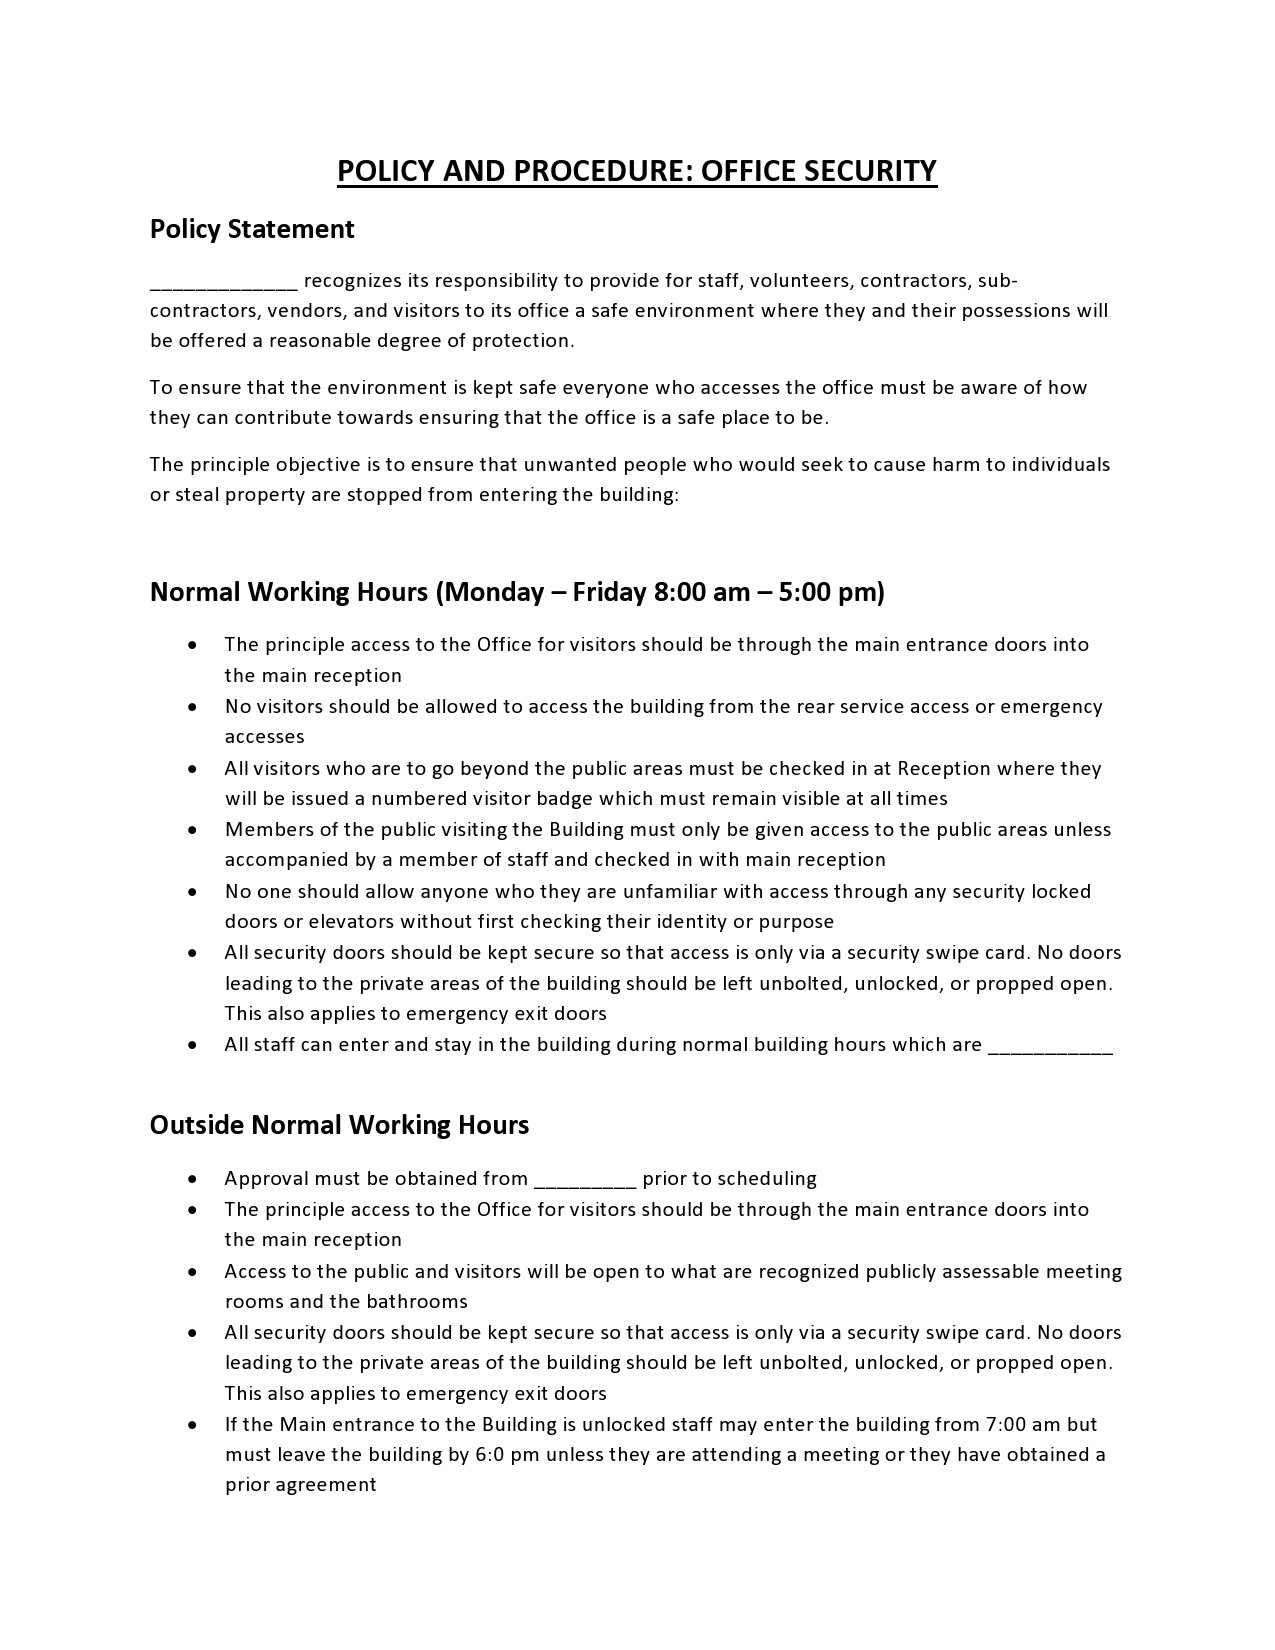 policy-and-procedure-manual-template-created-in-ms-word-easy-and-fast